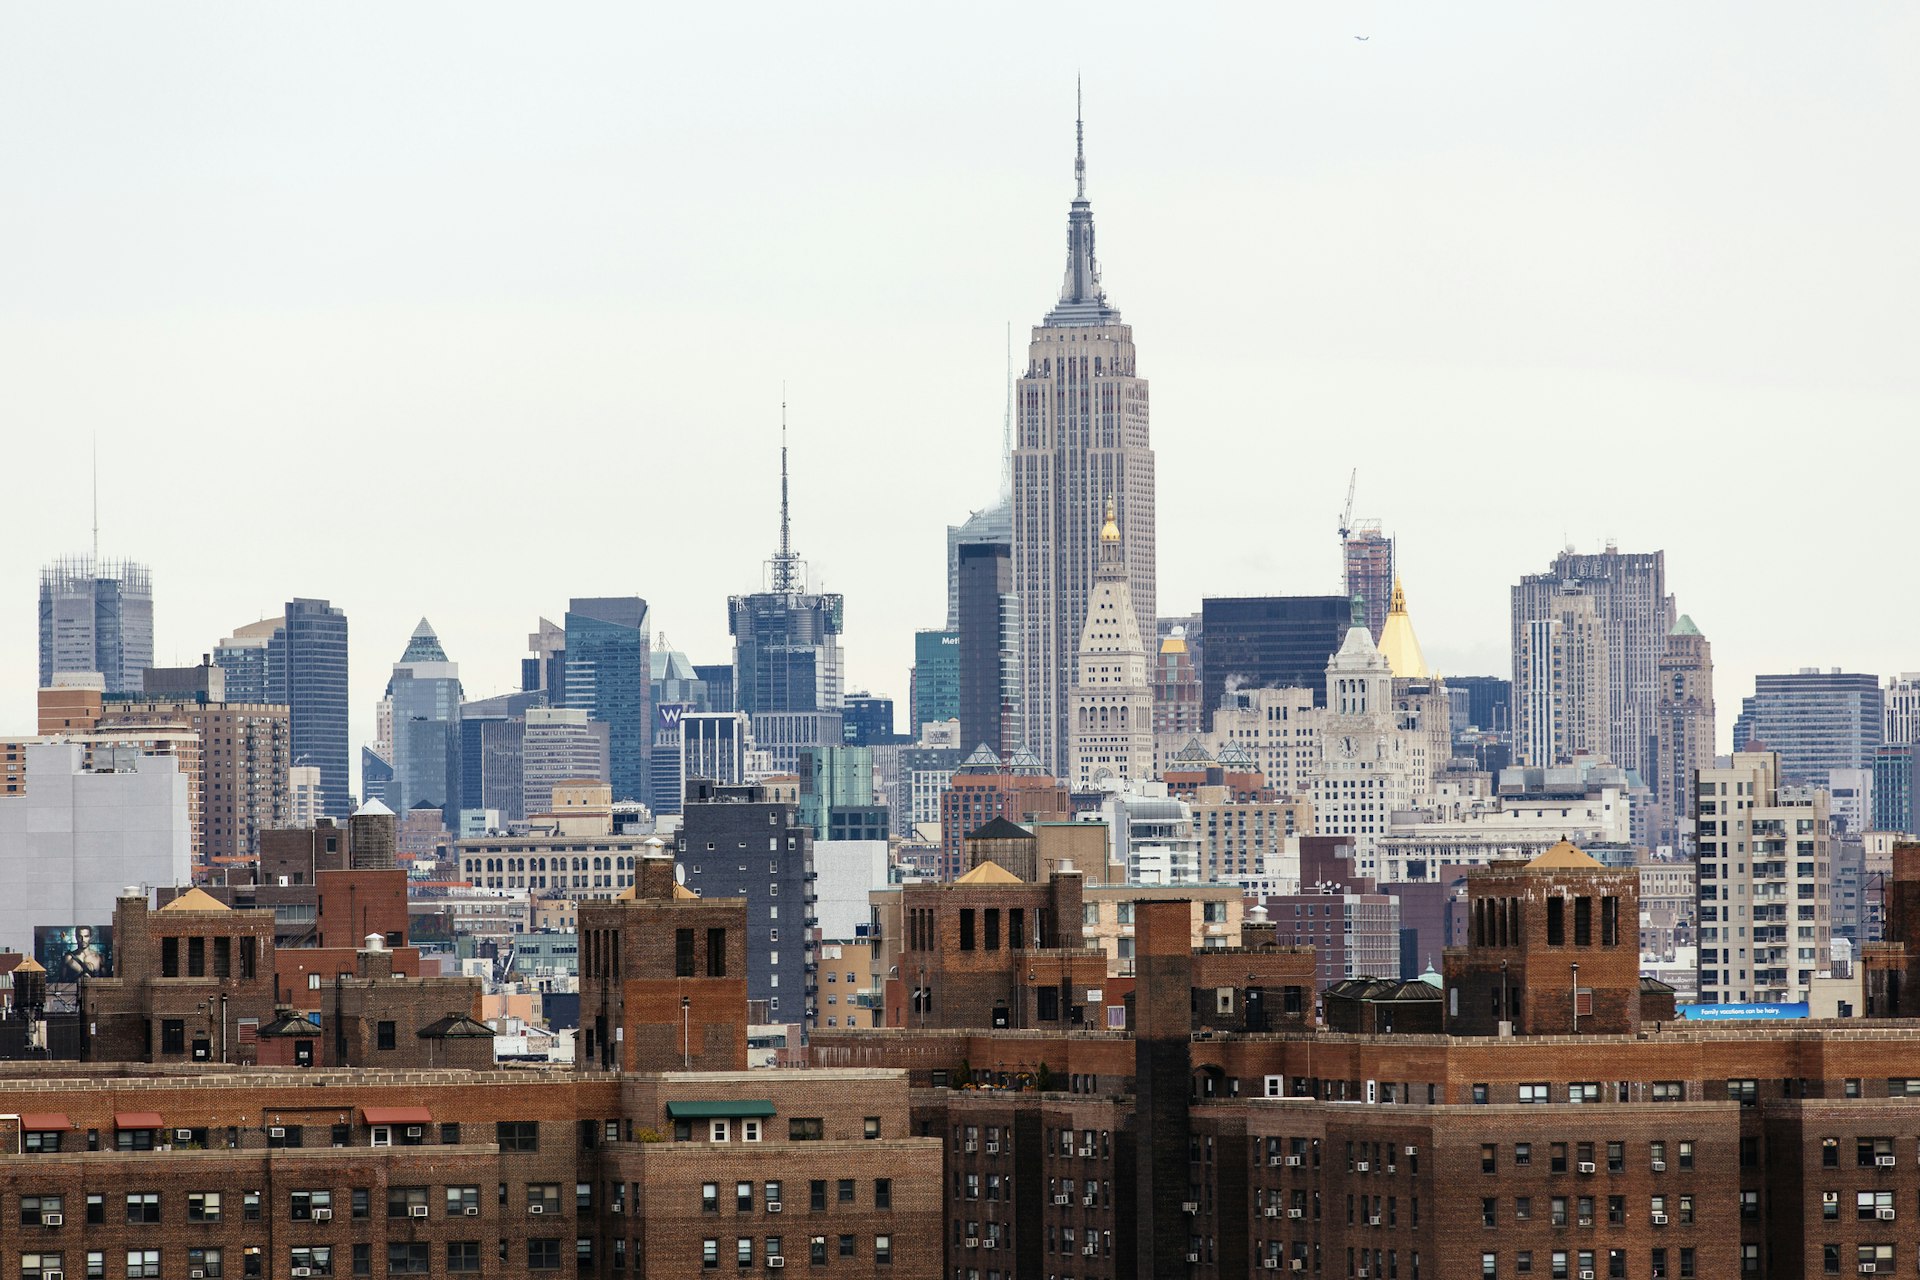 Manhattan skyline with Lower East Side on foreground and Empire State Building in the background.